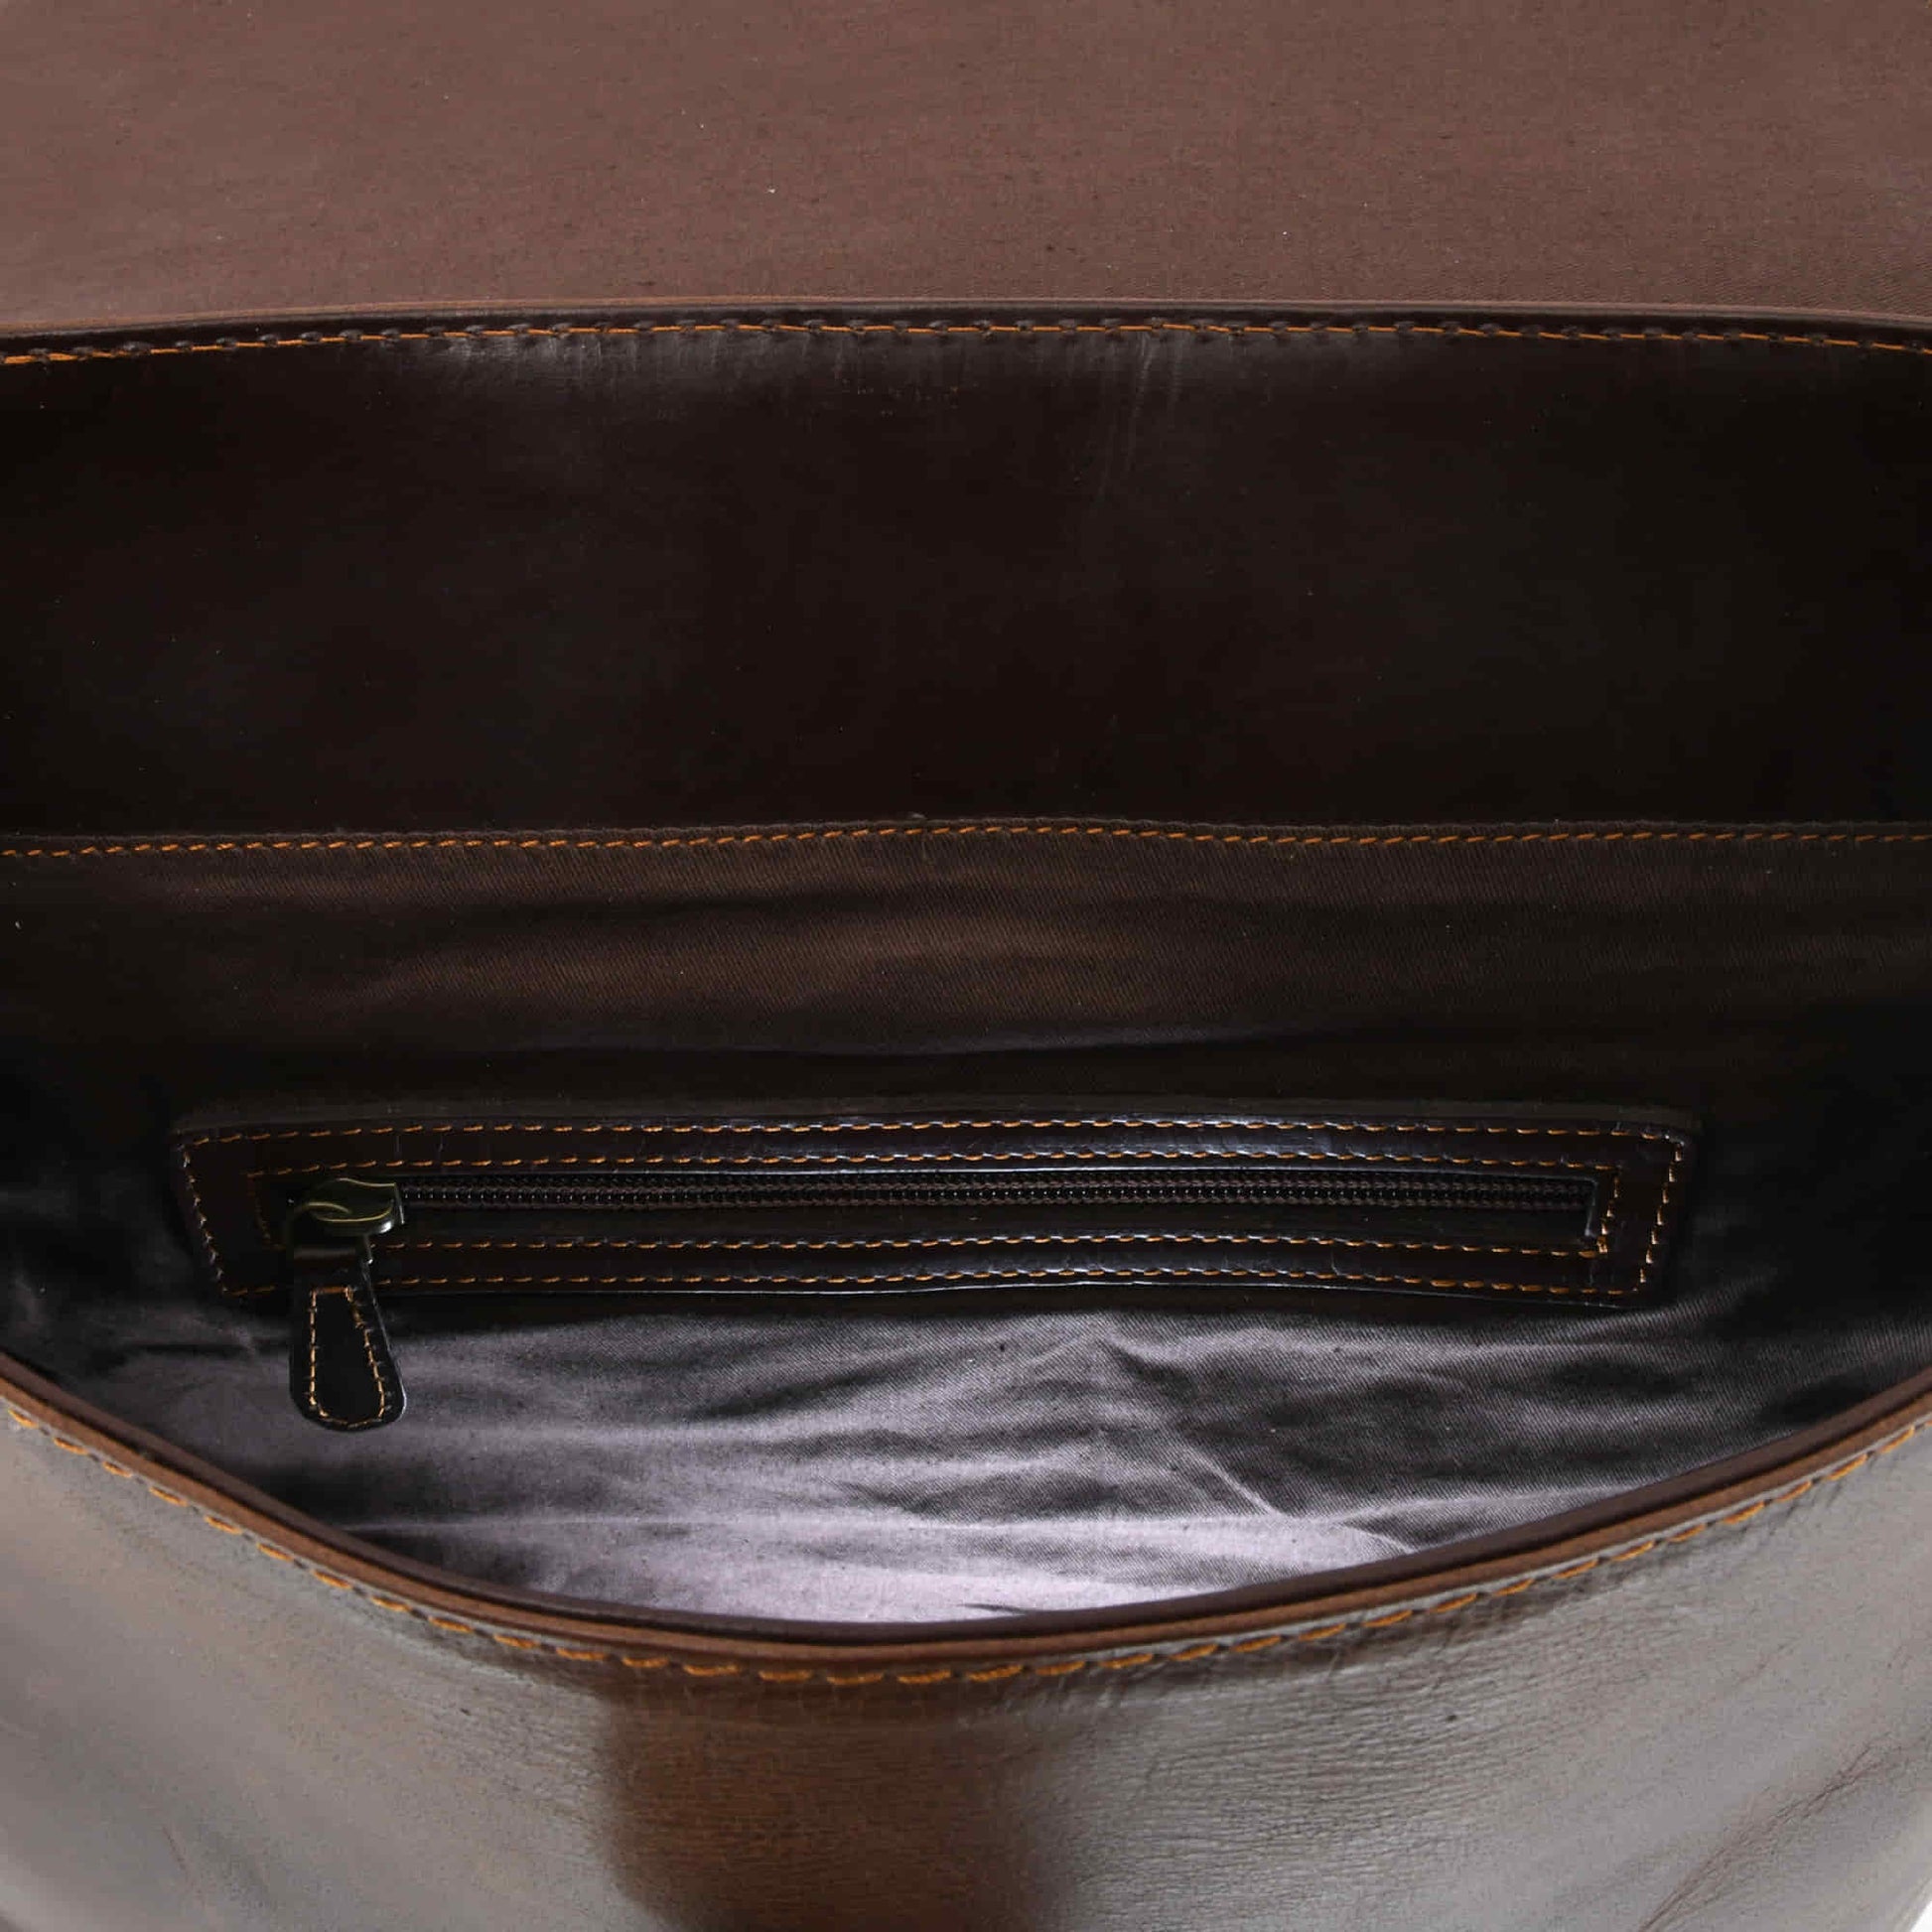 Style n Craft 392153 Backpack in Light & Dark Brown Combination Full Grain Leather - Interior view of the back wall of the bag showing the zipper pocket